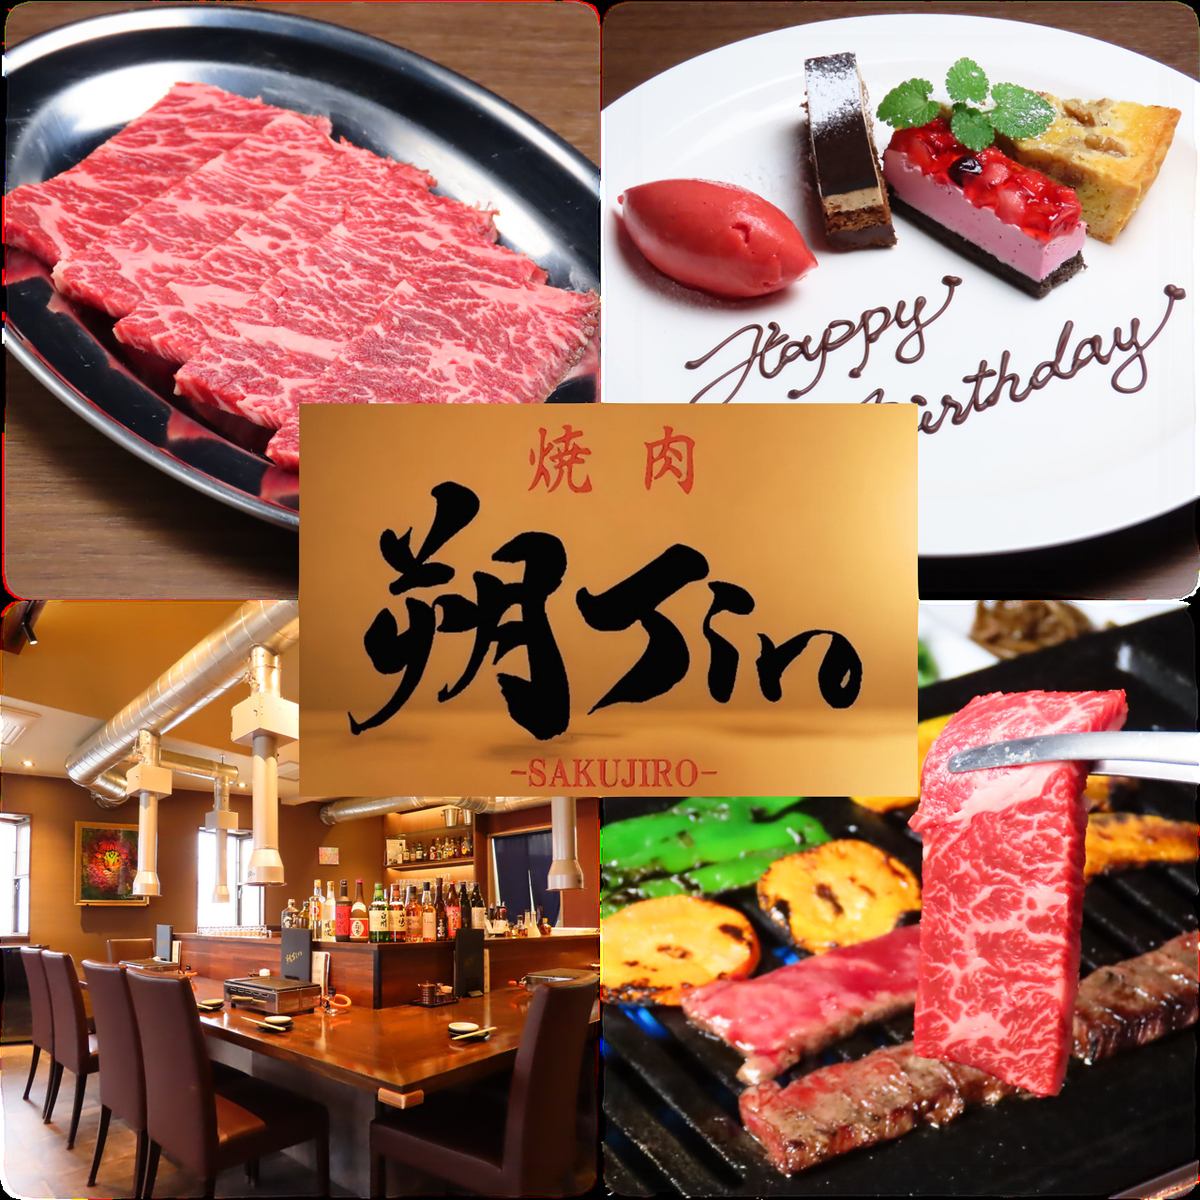 ◆◇Yakiniku restaurant that is particular about quality, rare breeds, and hand-cut meat ◇◆Children welcome◎Perfect for anniversaries